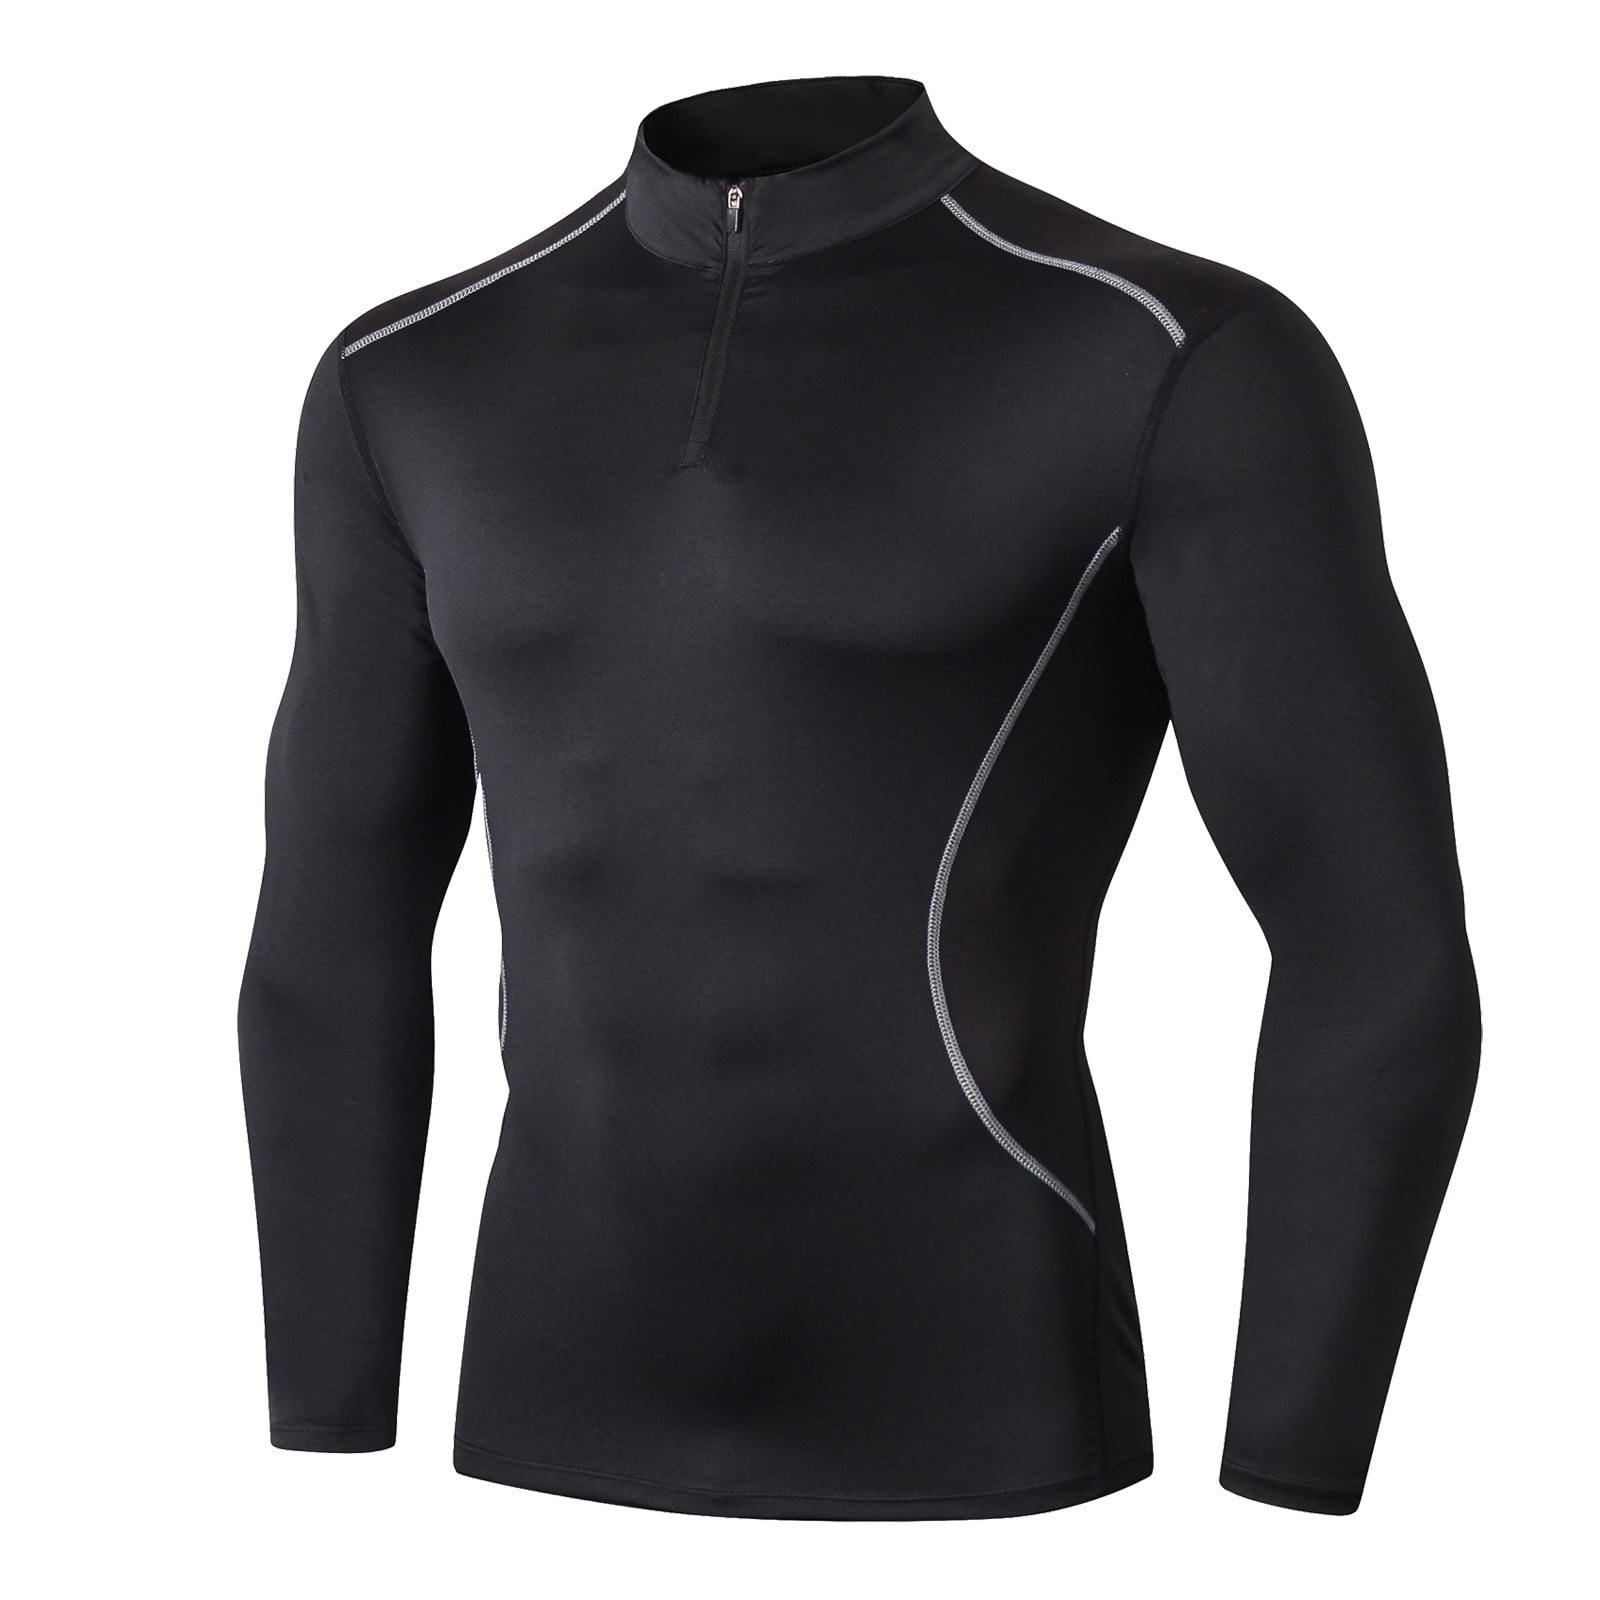 NELEUS Men Dry Fit Long Sleeve Compression Shirts Workout Running Shirts 3  Pack,Black,US Size S 